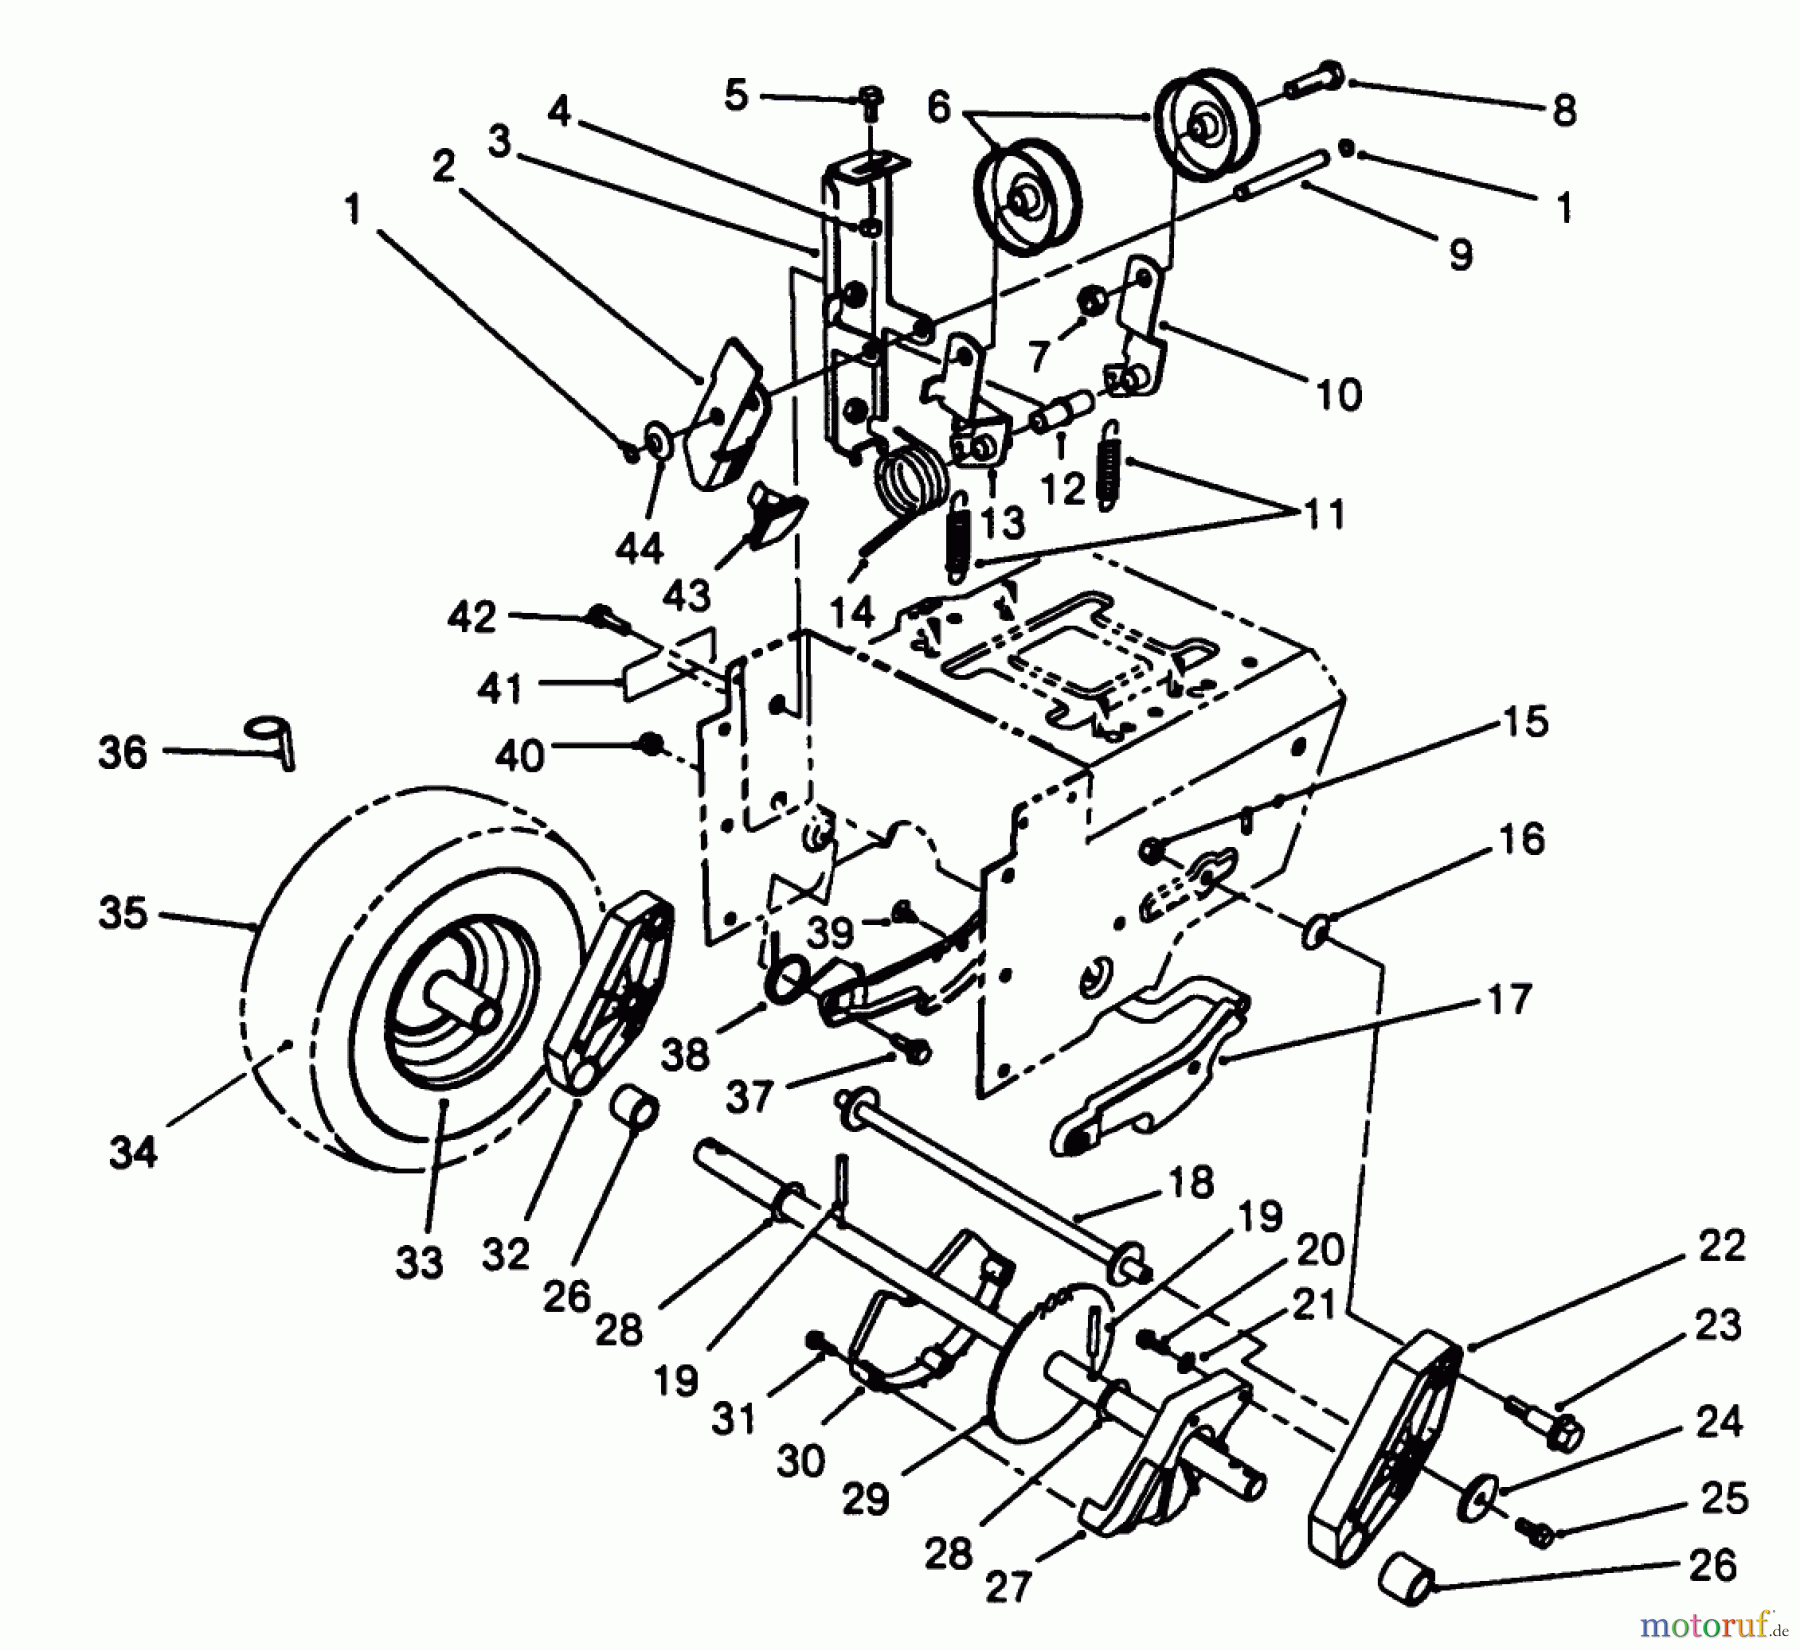  Toro Neu Snow Blowers/Snow Throwers Seite 1 38525 (724) - Toro 724 Power Shift Snowthrower, 1988 (8000001-8999999) TRACTION DRIVE ASSEMBLY